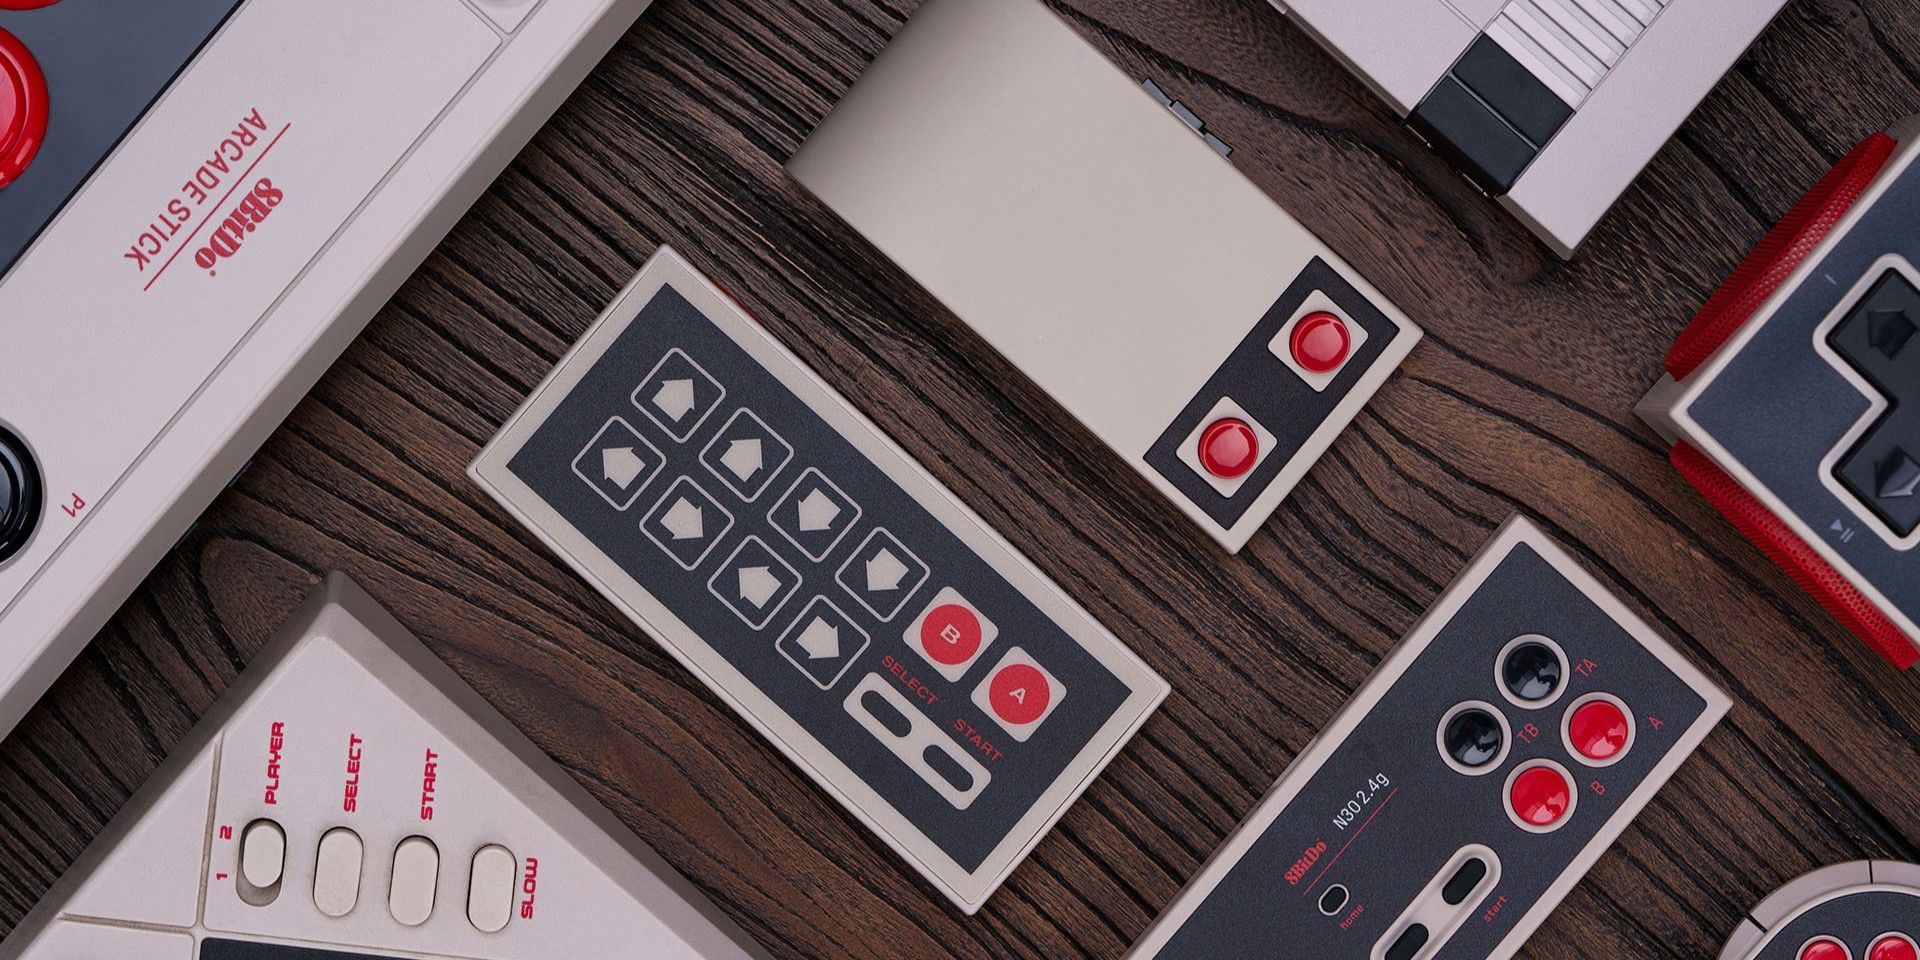 8bitDo N30 accessories pictured on a wooden surface